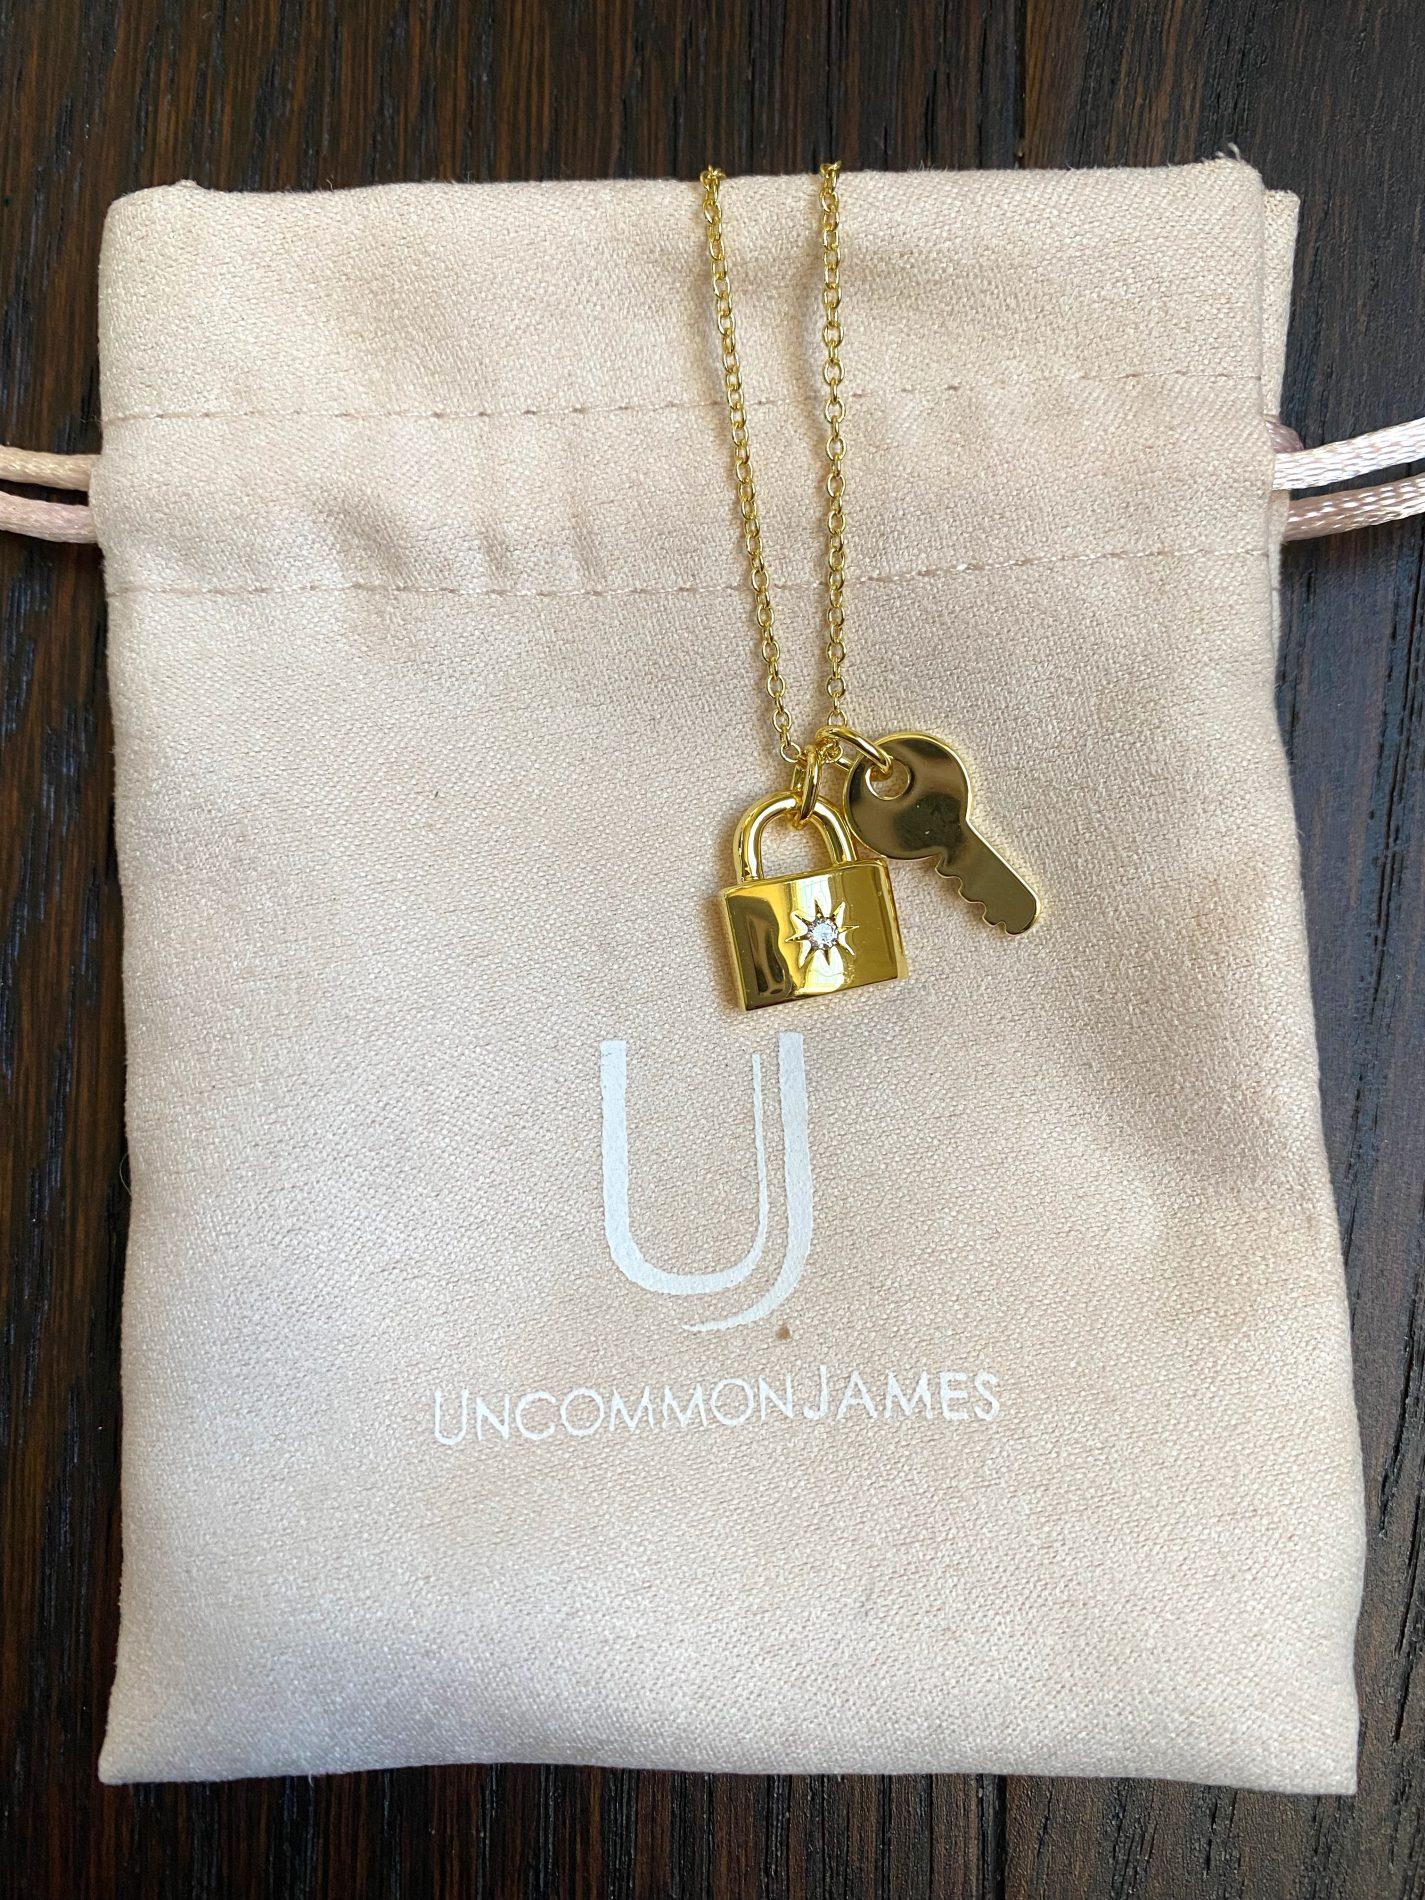 Read more about the article Uncommon James Monthly Mystery Item Review – Winter 2021